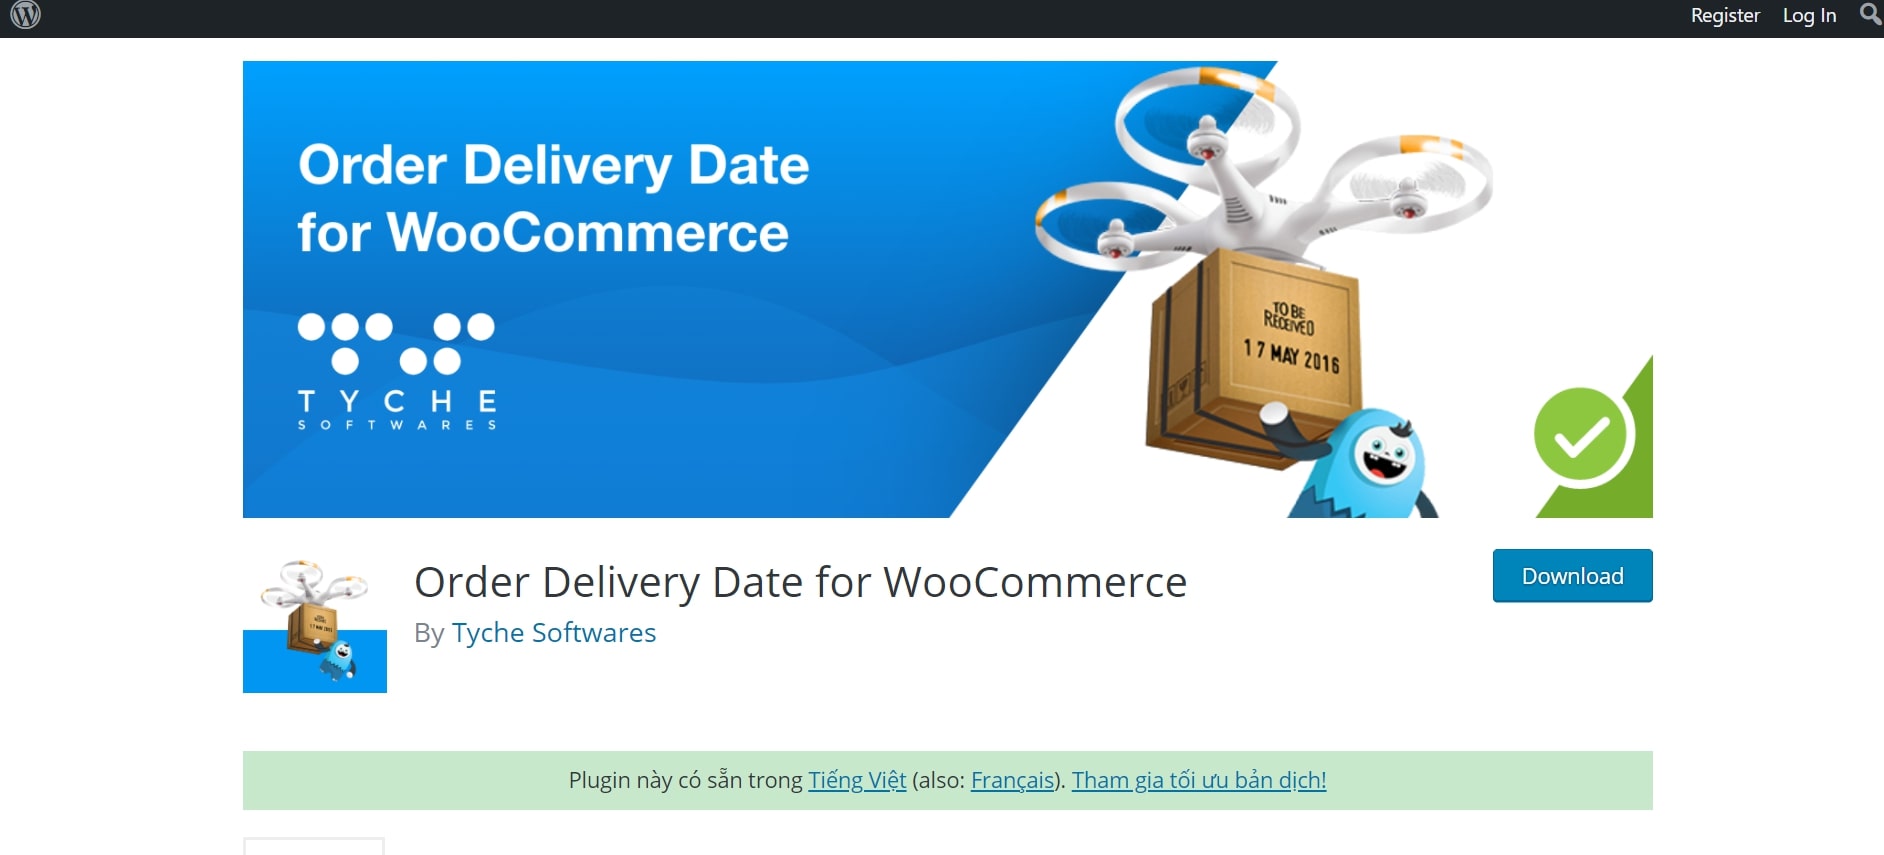 Order Delivery Date for WooCommerce